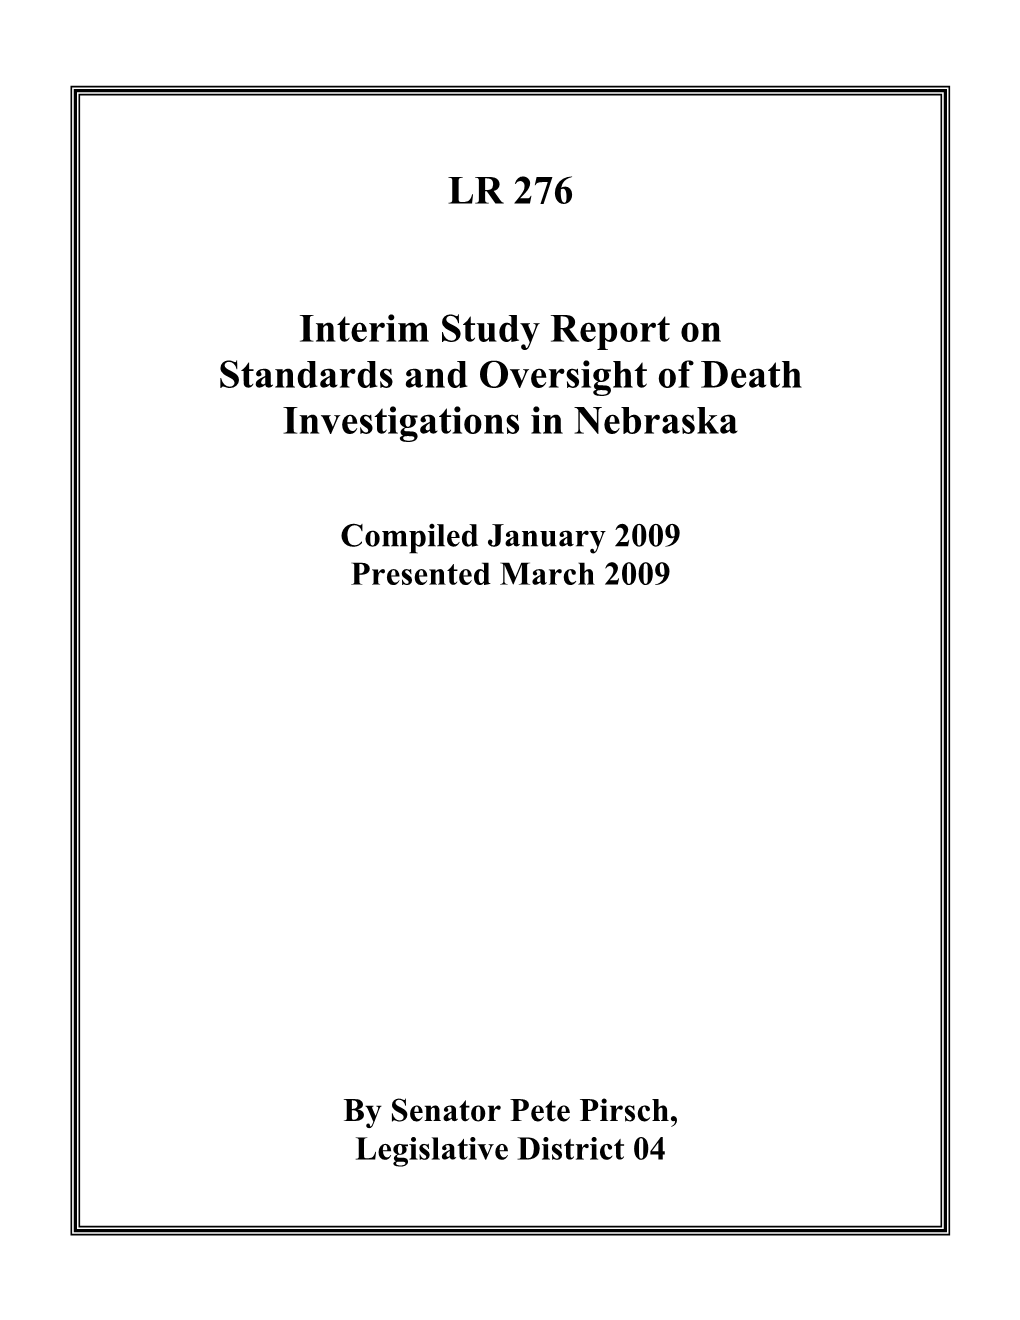 LR 276 Interim Study Report on Standards and Oversight of Death